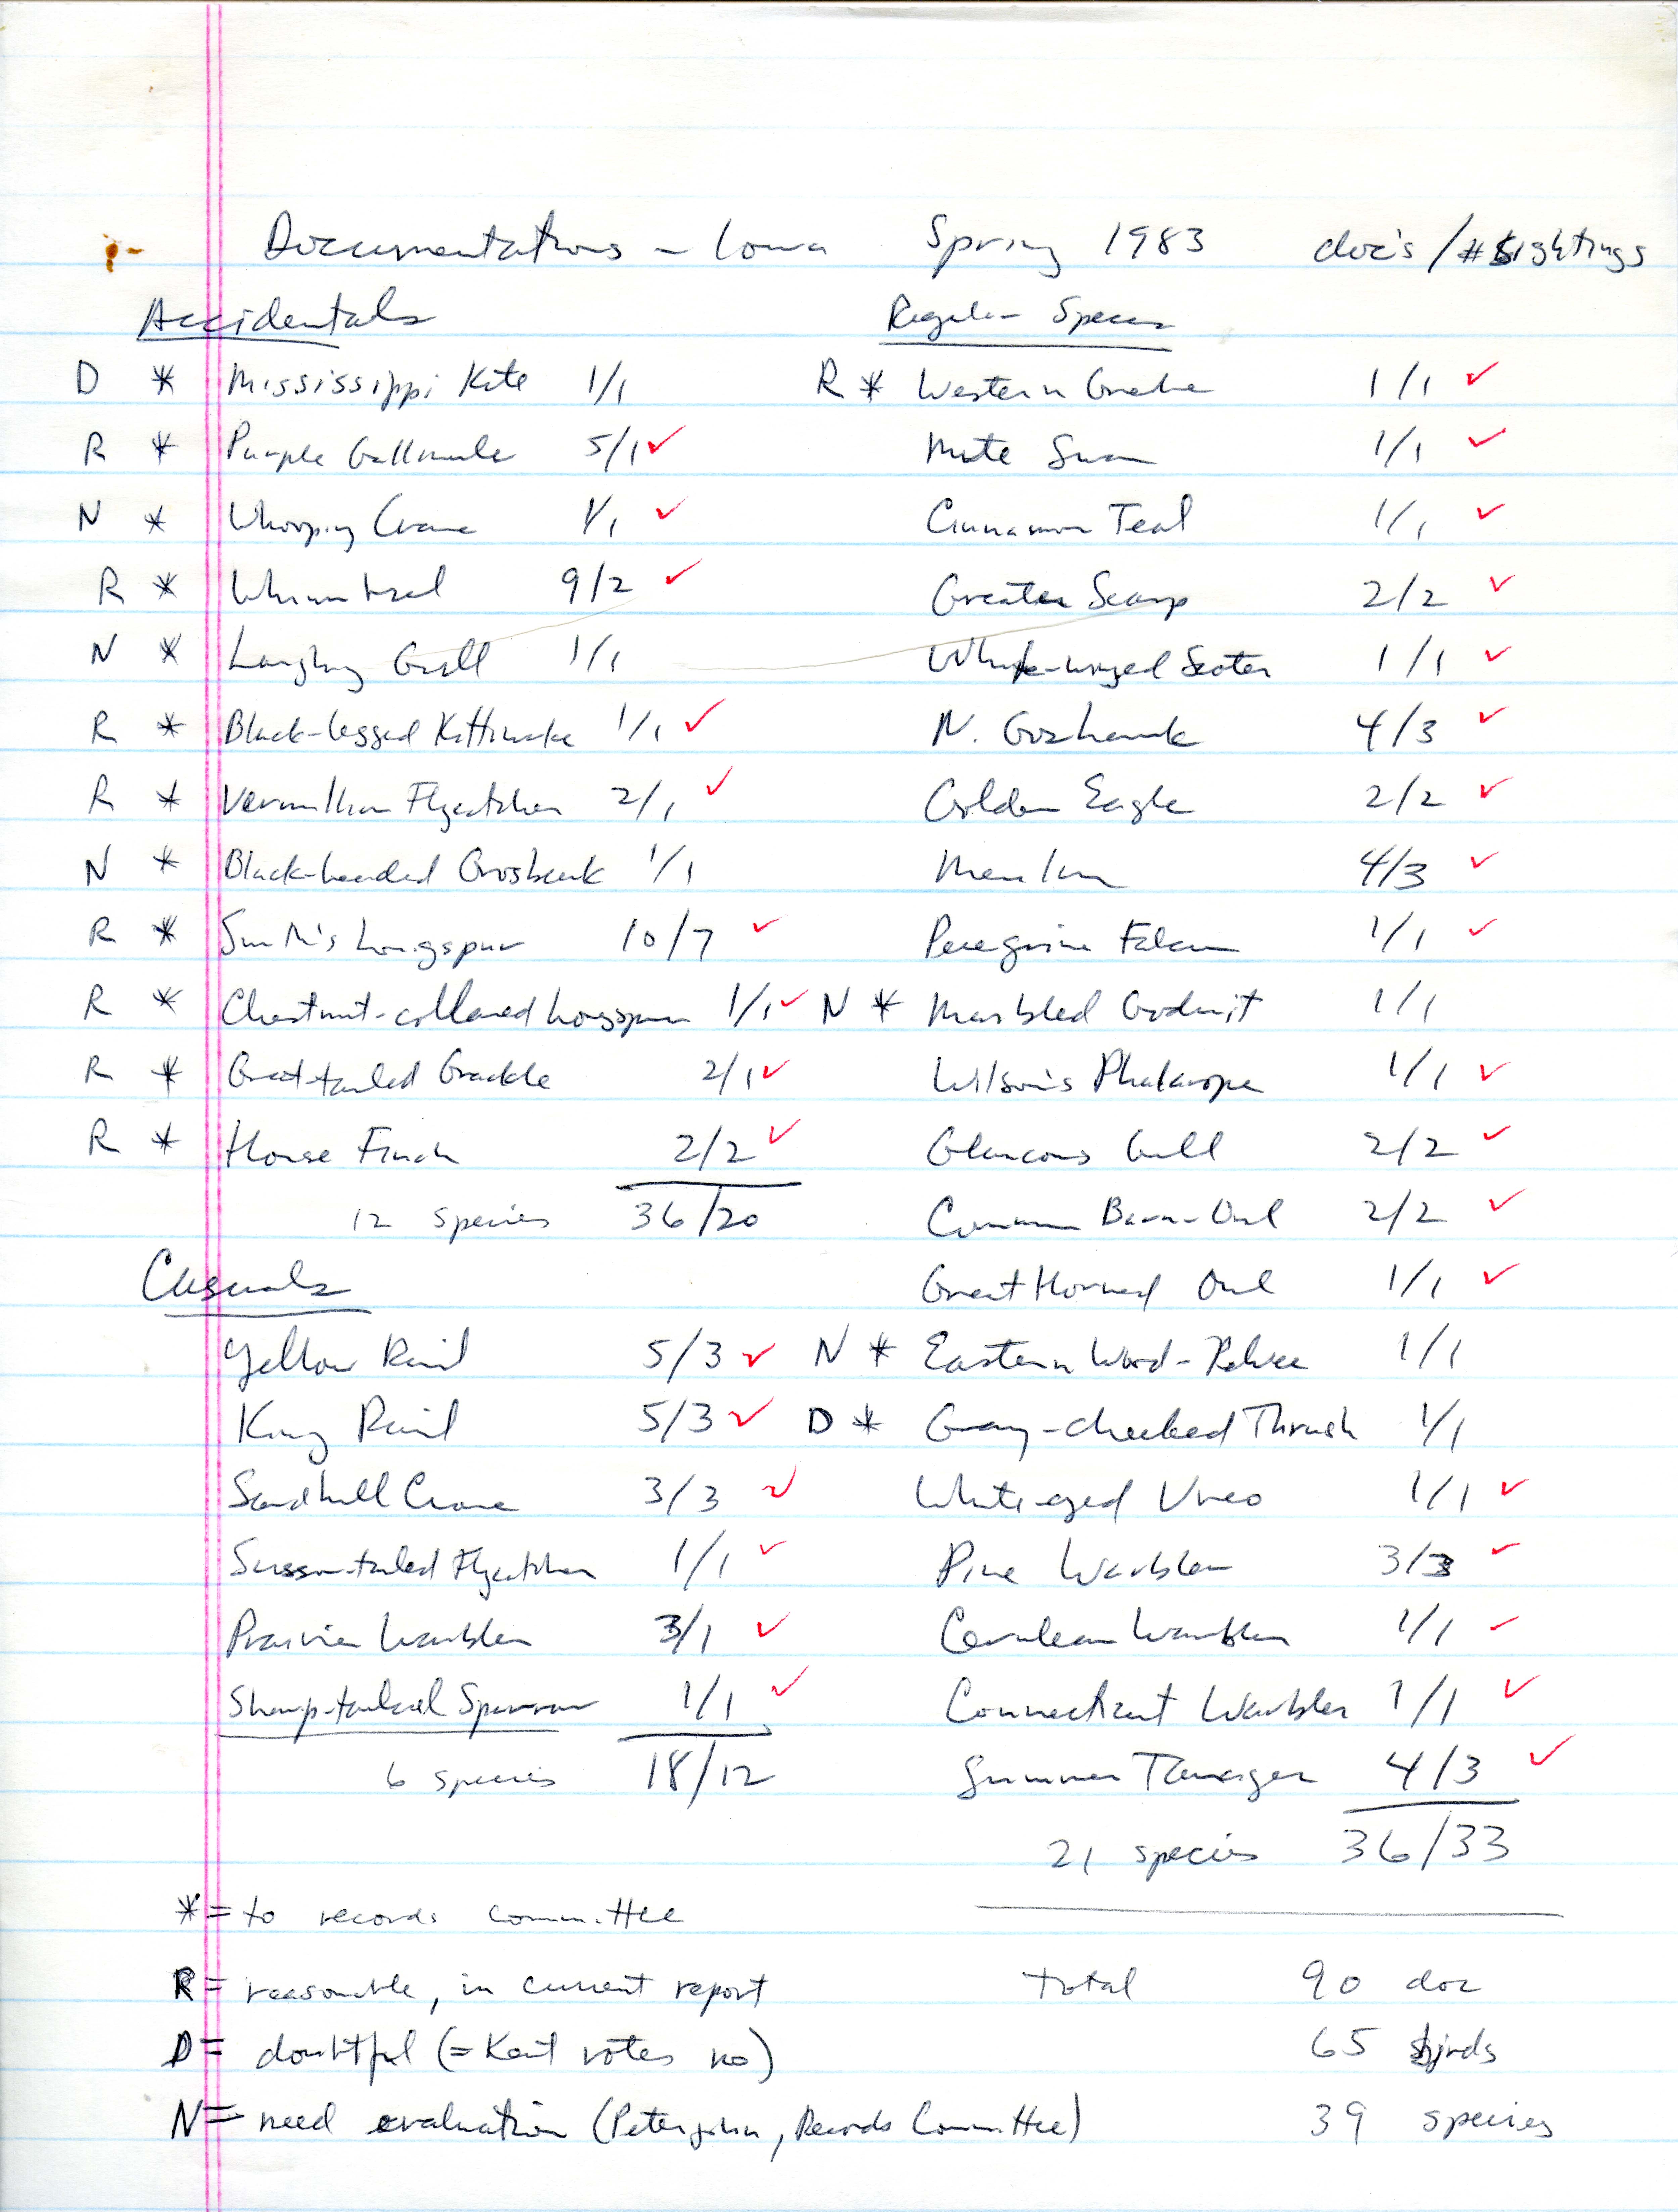 Documentation of accidental, casual, and regular species sightings compiled by Thomas H. Kent, spring 1983